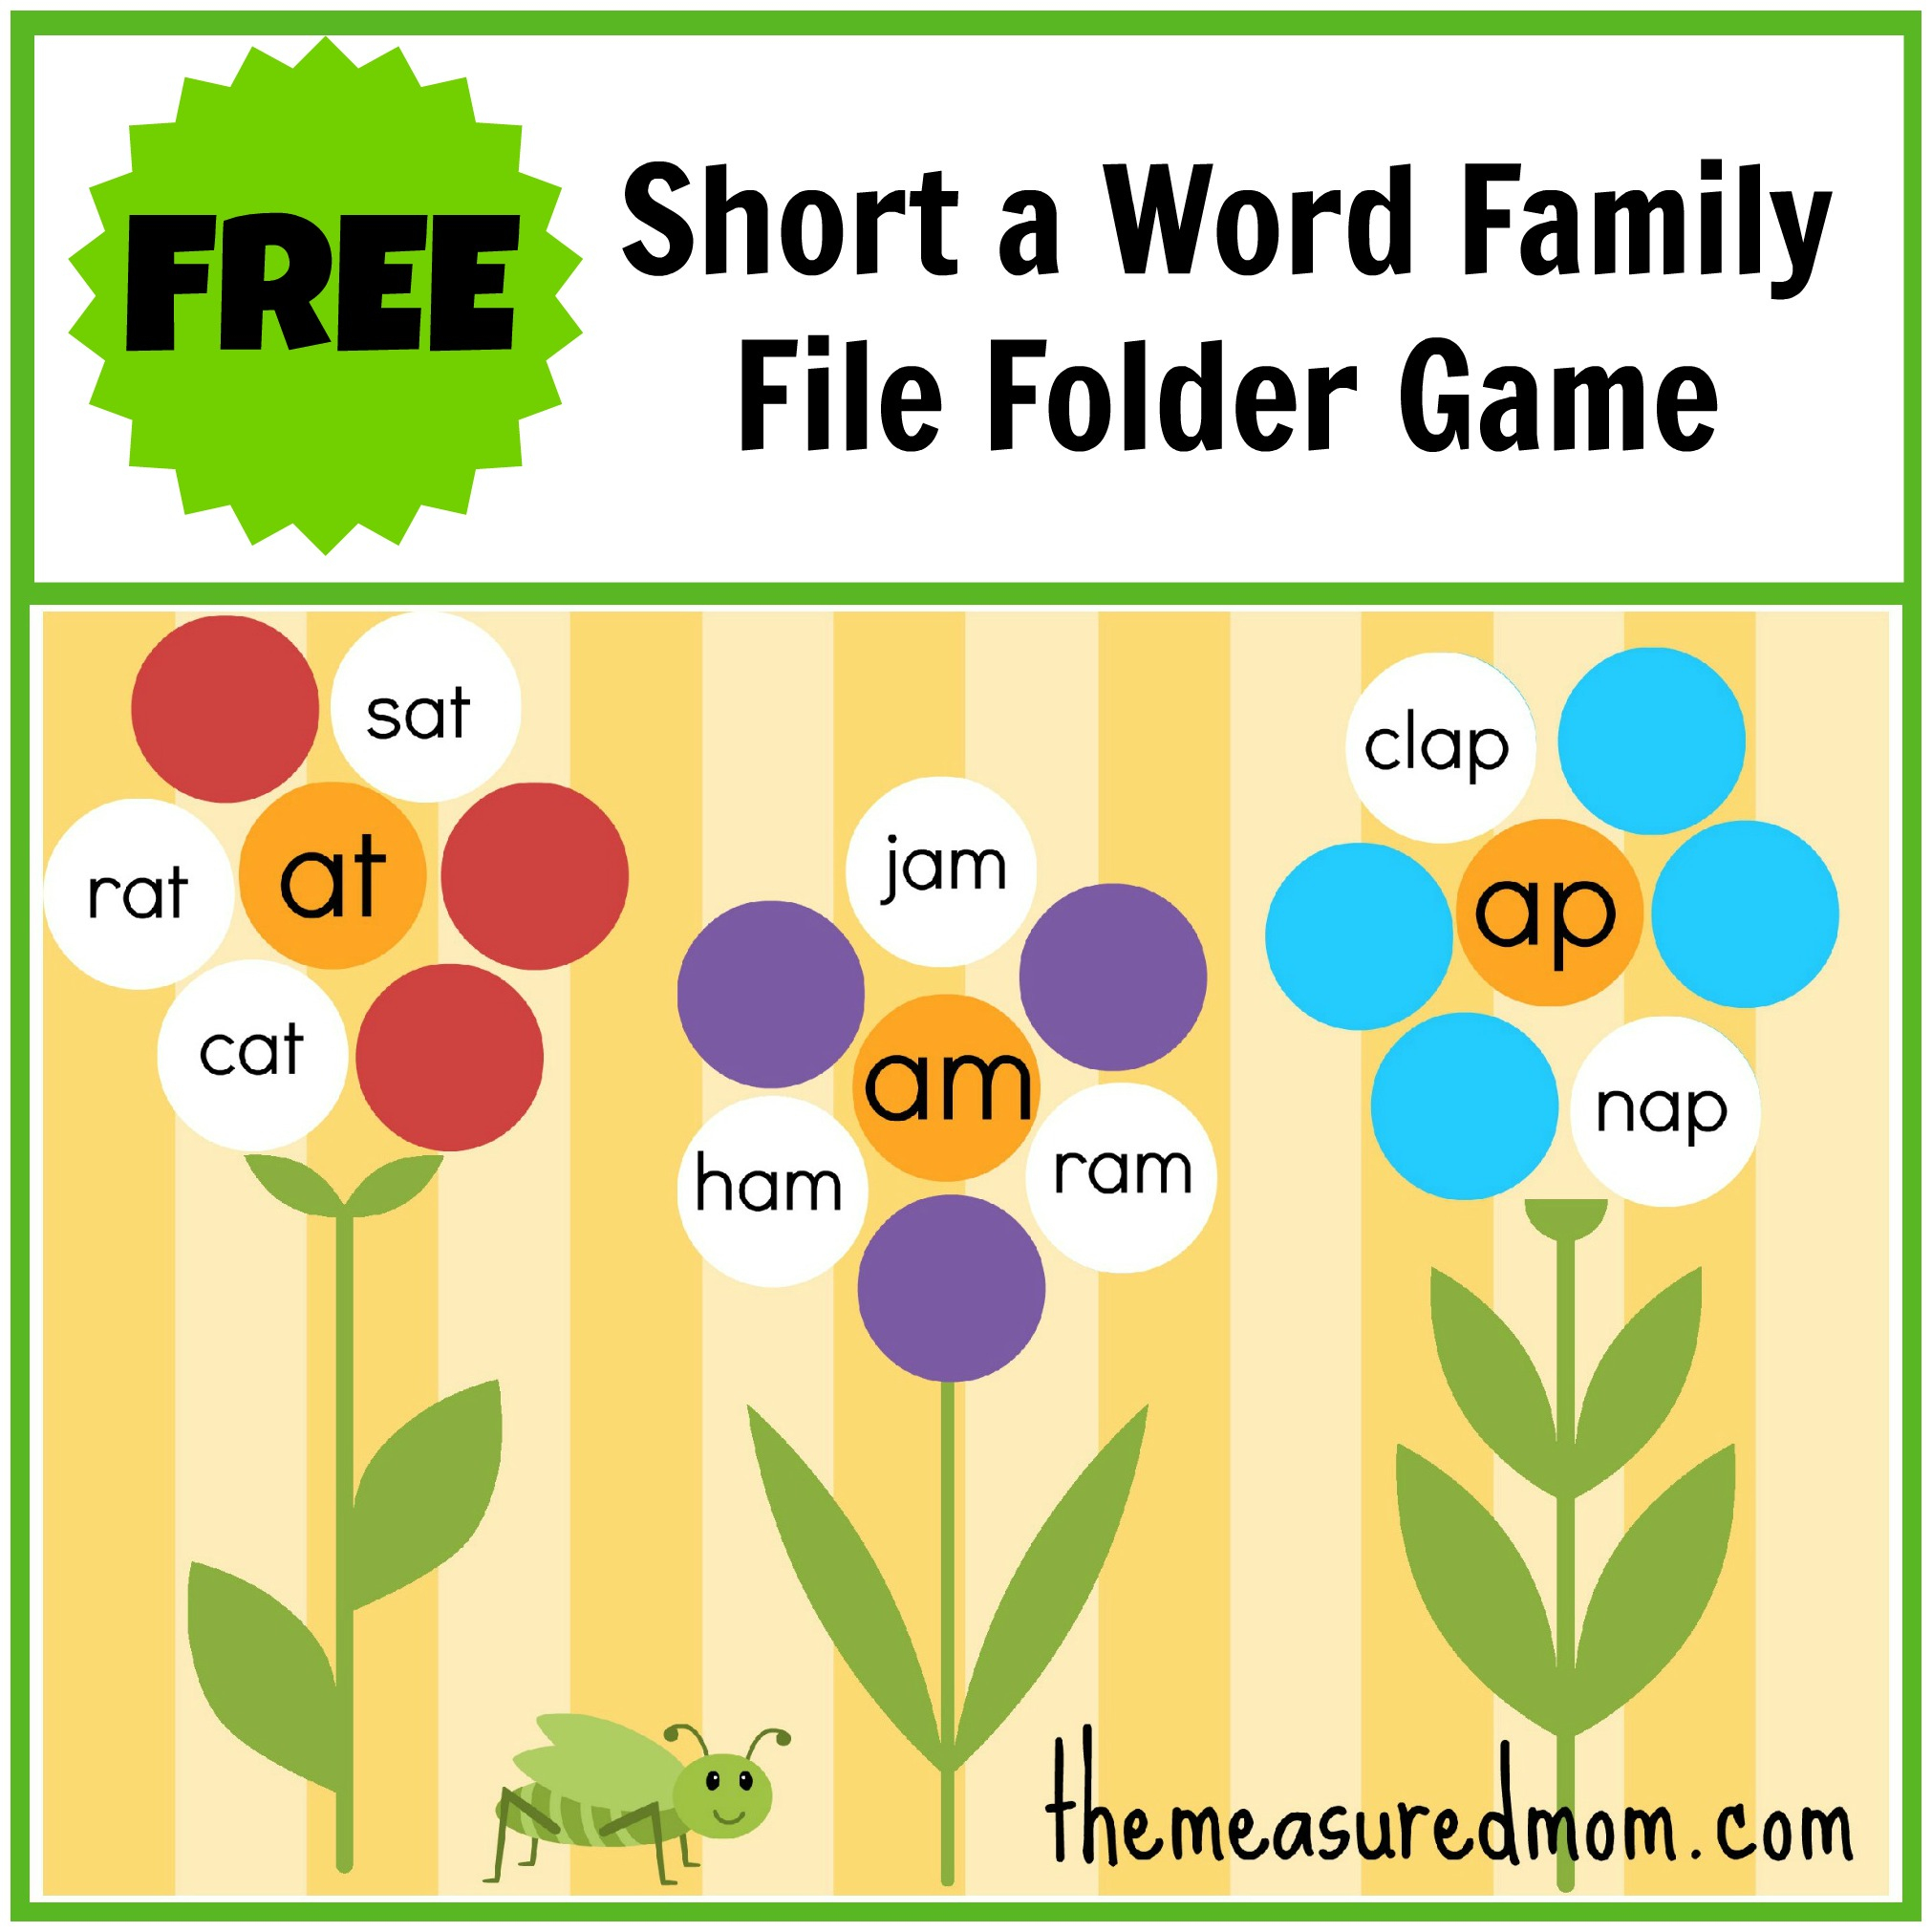 Free Word Family File Folder Game: Short A - The Measured Mom - Free Printable Word Family Games